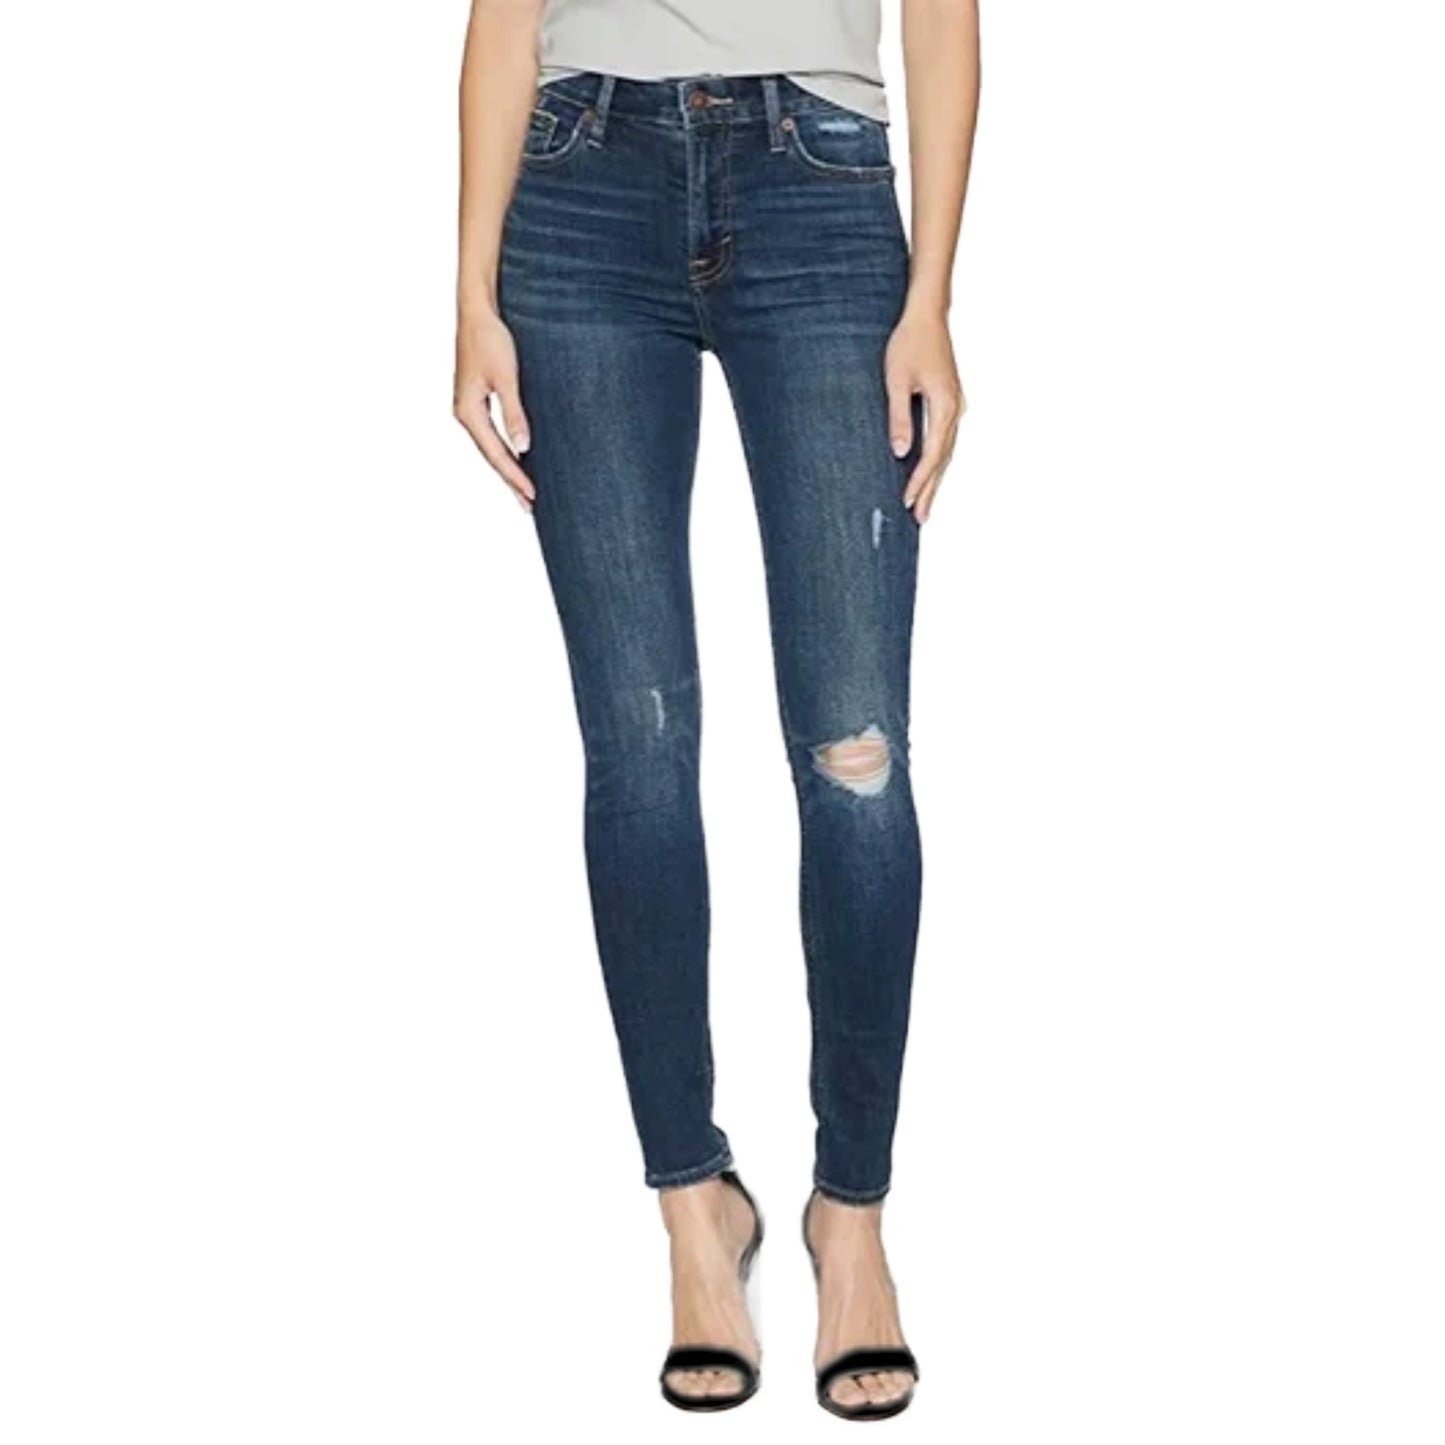 Lucky Brand Bridgette High Rise Slim Fit Distressed Skinny Jeans